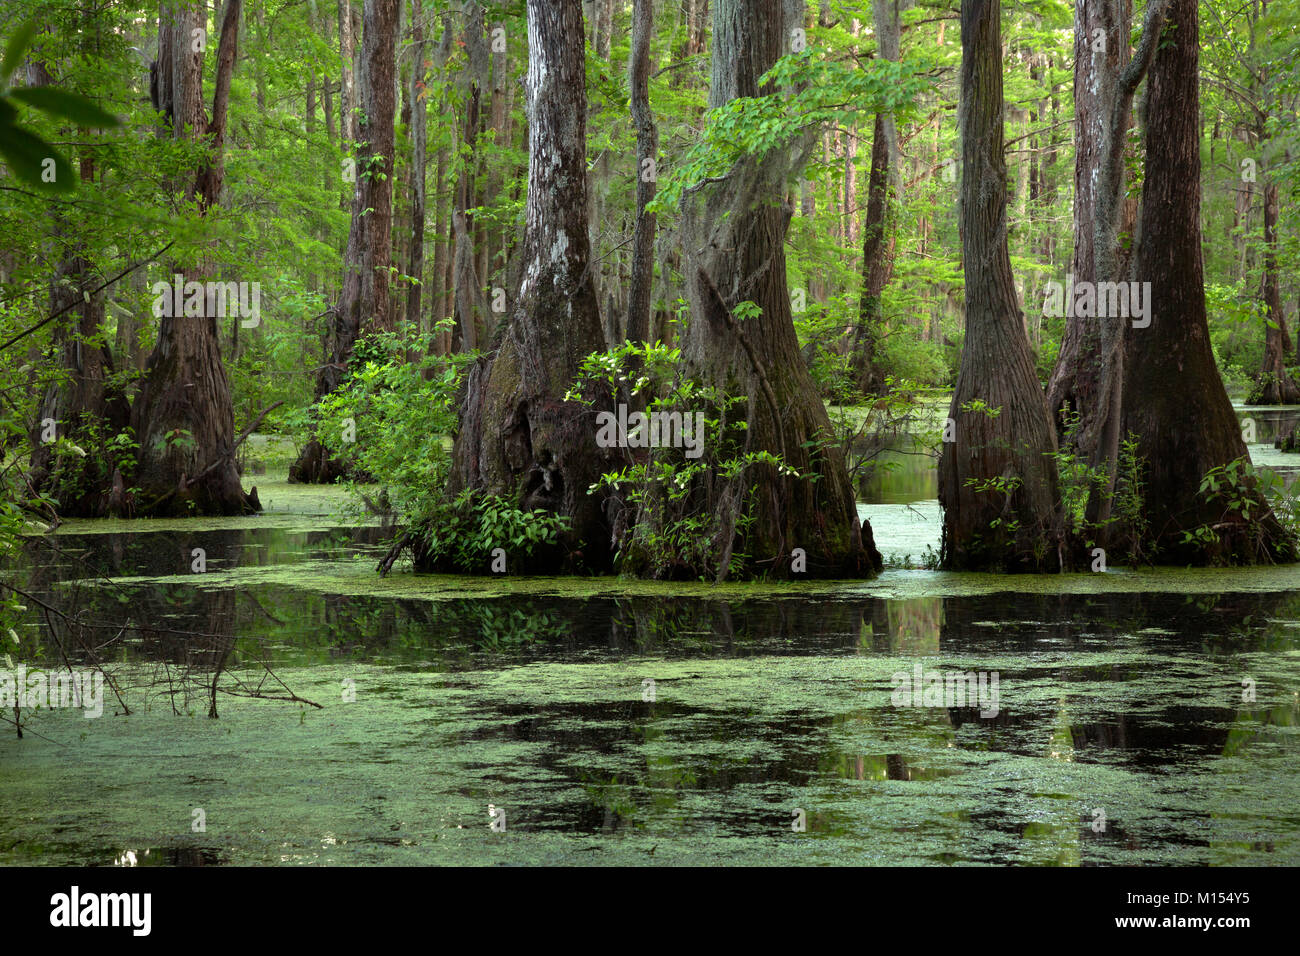 NC01479-00...NORTH CAROLINA - Bald cypress and tupalo gum trees surrounded by a scum of duckweed in Merchant Millpond; at Merchant Millpond State Park Stock Photo